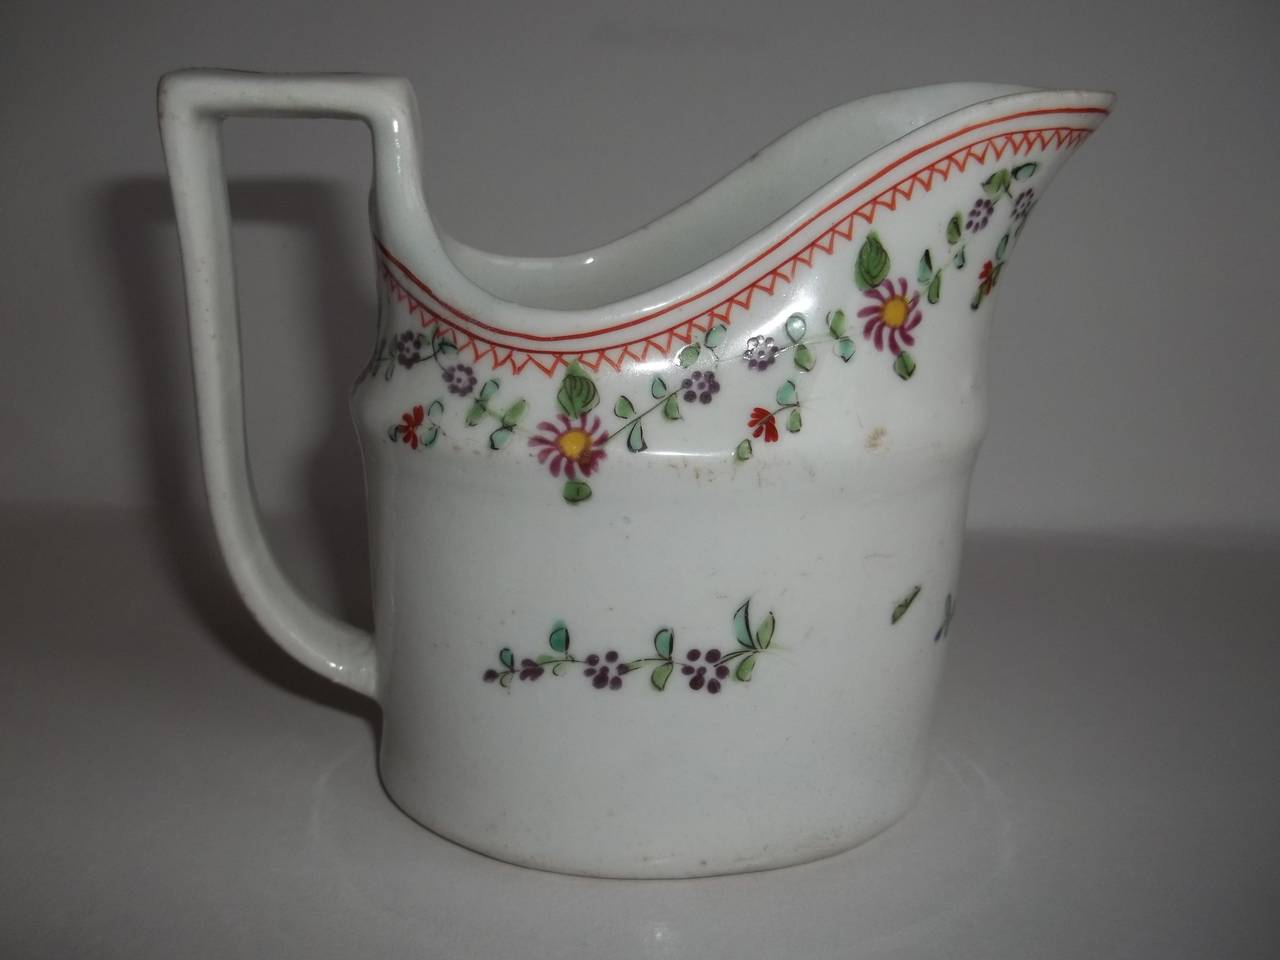 This is an elegant, hard paste porcelain, silver shaped milk jug or creamer made by the John Rose Coalport factory, England circa 1800. 

It has an oval shape with a high loop handle. 

The creamer is beautifully hand decorated with a simple floral